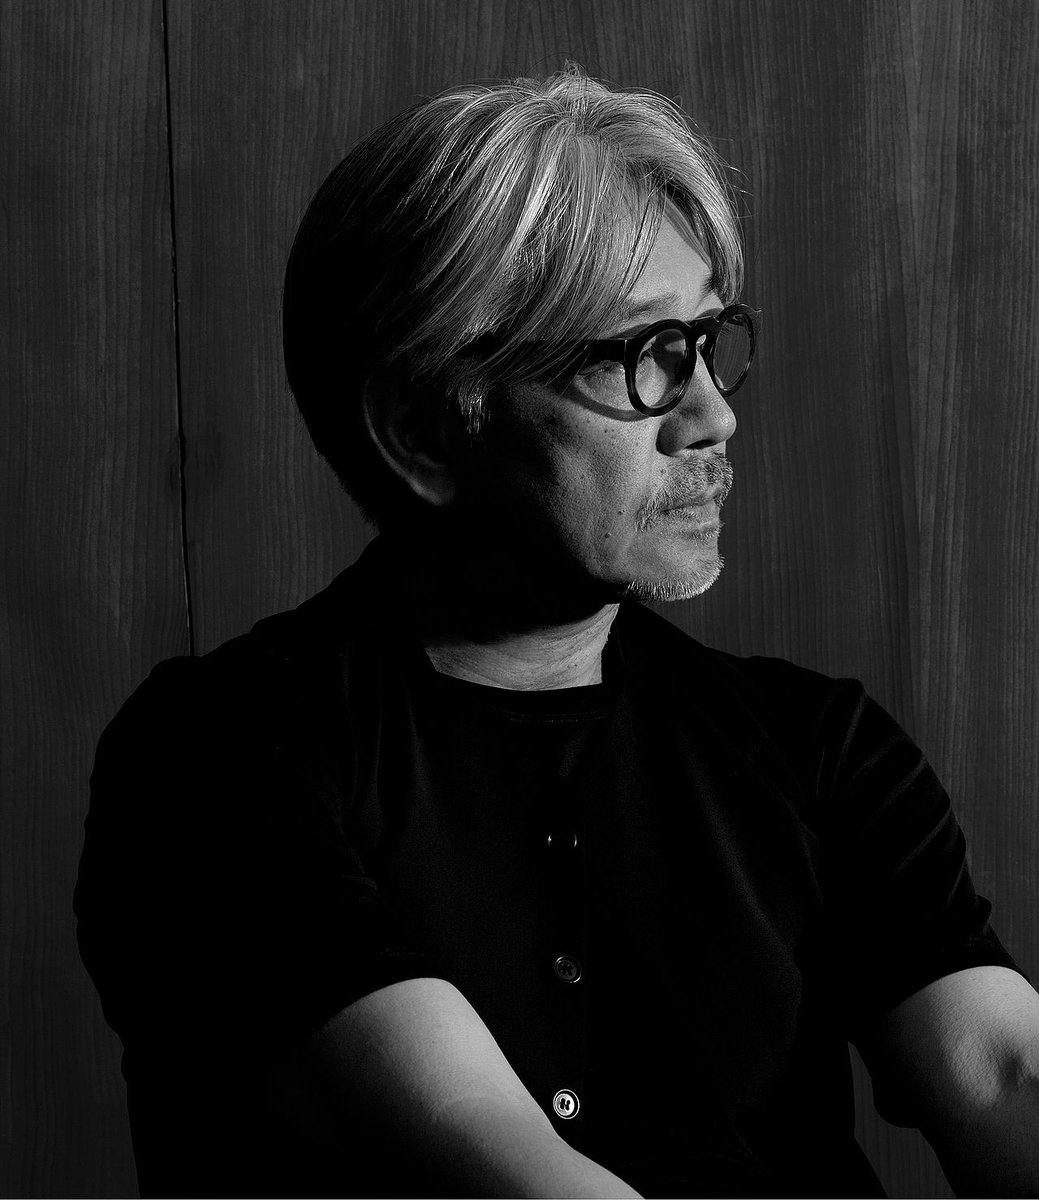 Goodnight to the exquisite Ryuichi Sakamoto—legendary and beloved musician, composer, actor, and writer. ❤️